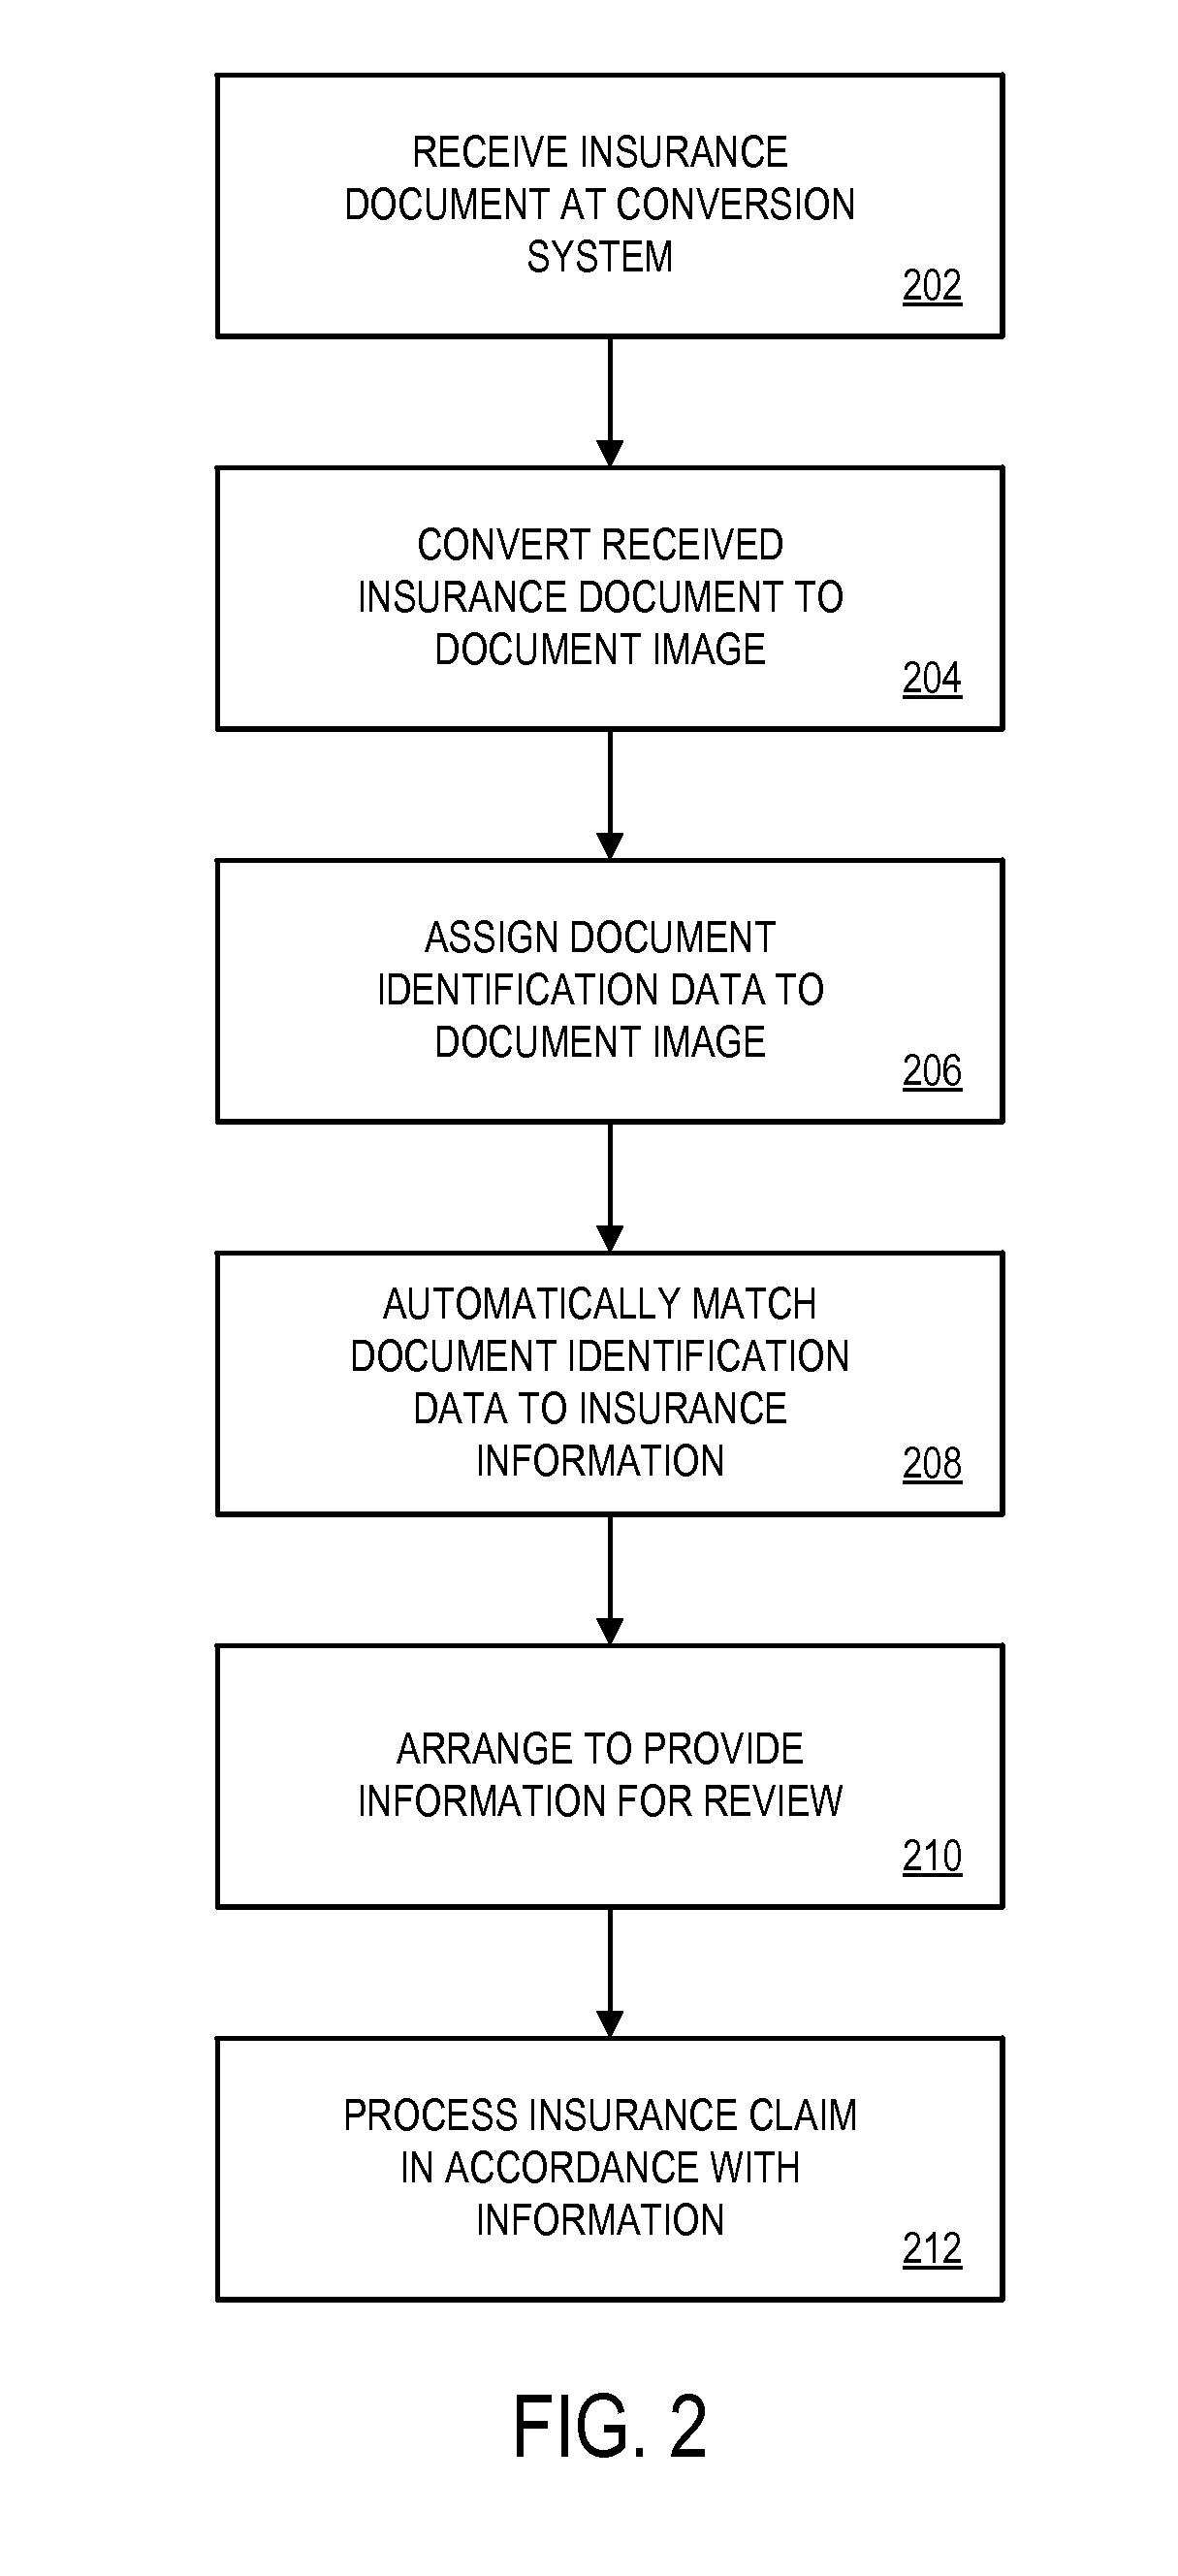 Insurance document imaging and processing system